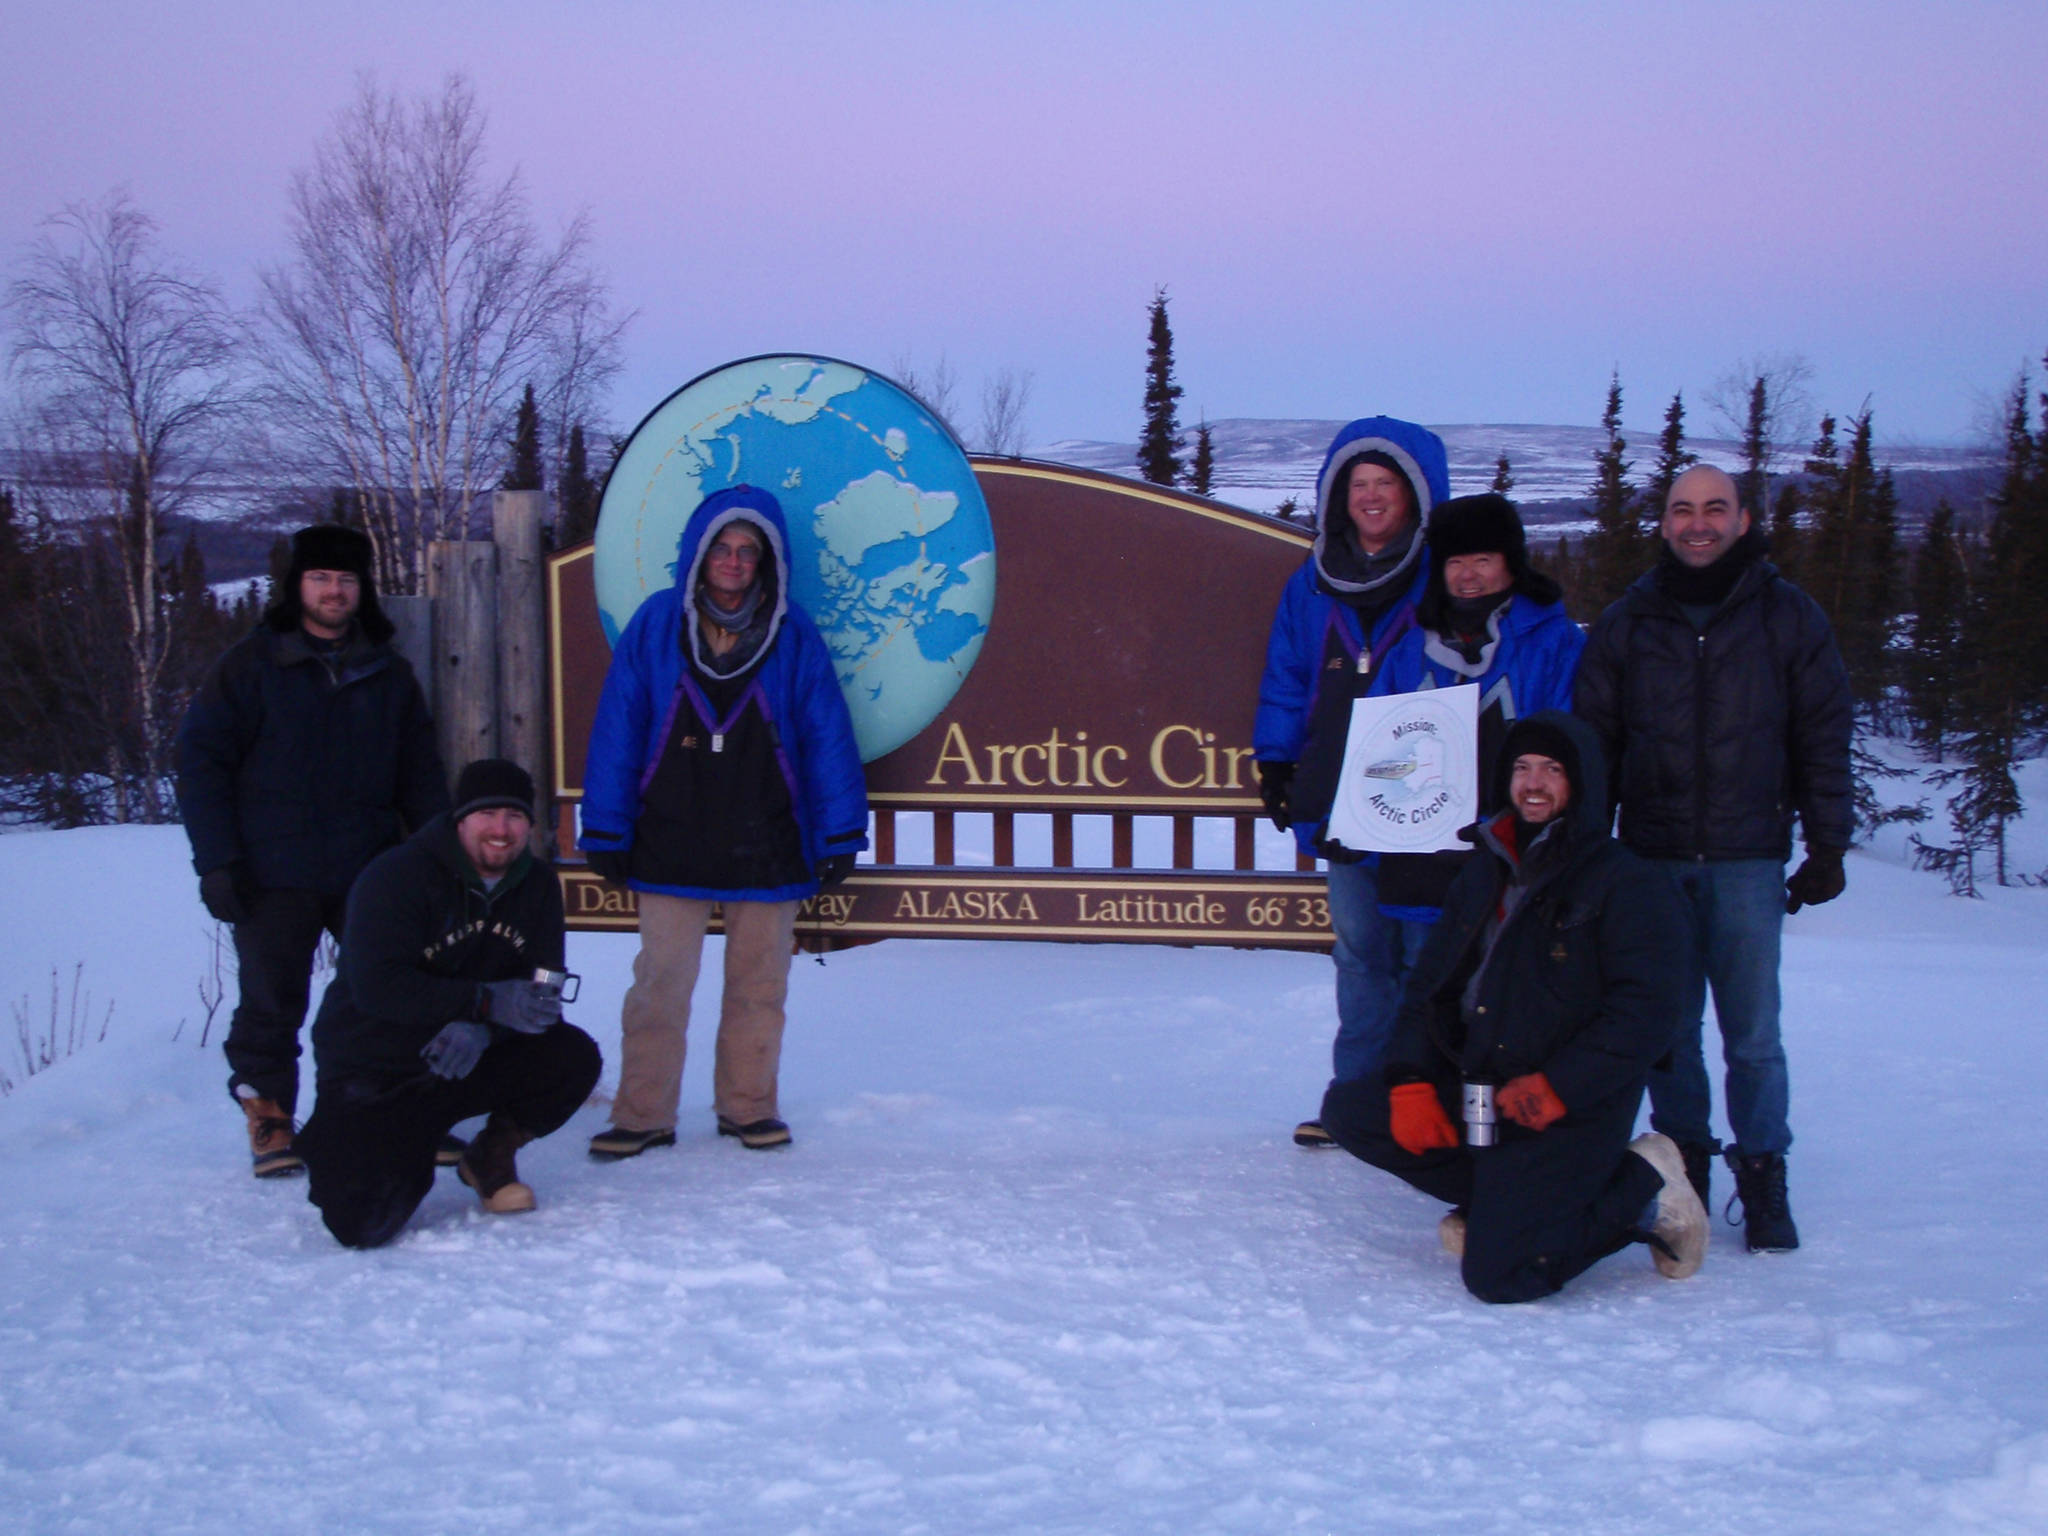 From left, Ryan West, Shawn Freitas, John Whittington, Doug Morrow, Bernie Tao, Darrin Marshall, and Andy Soria pose at the Arctic Circle pull-out on the Dalton Highway, where they camped in March 2009 to test the cold-weather performance of “Permaflo Biodiesel.” (Darrin Marshall | Courtesy photo)